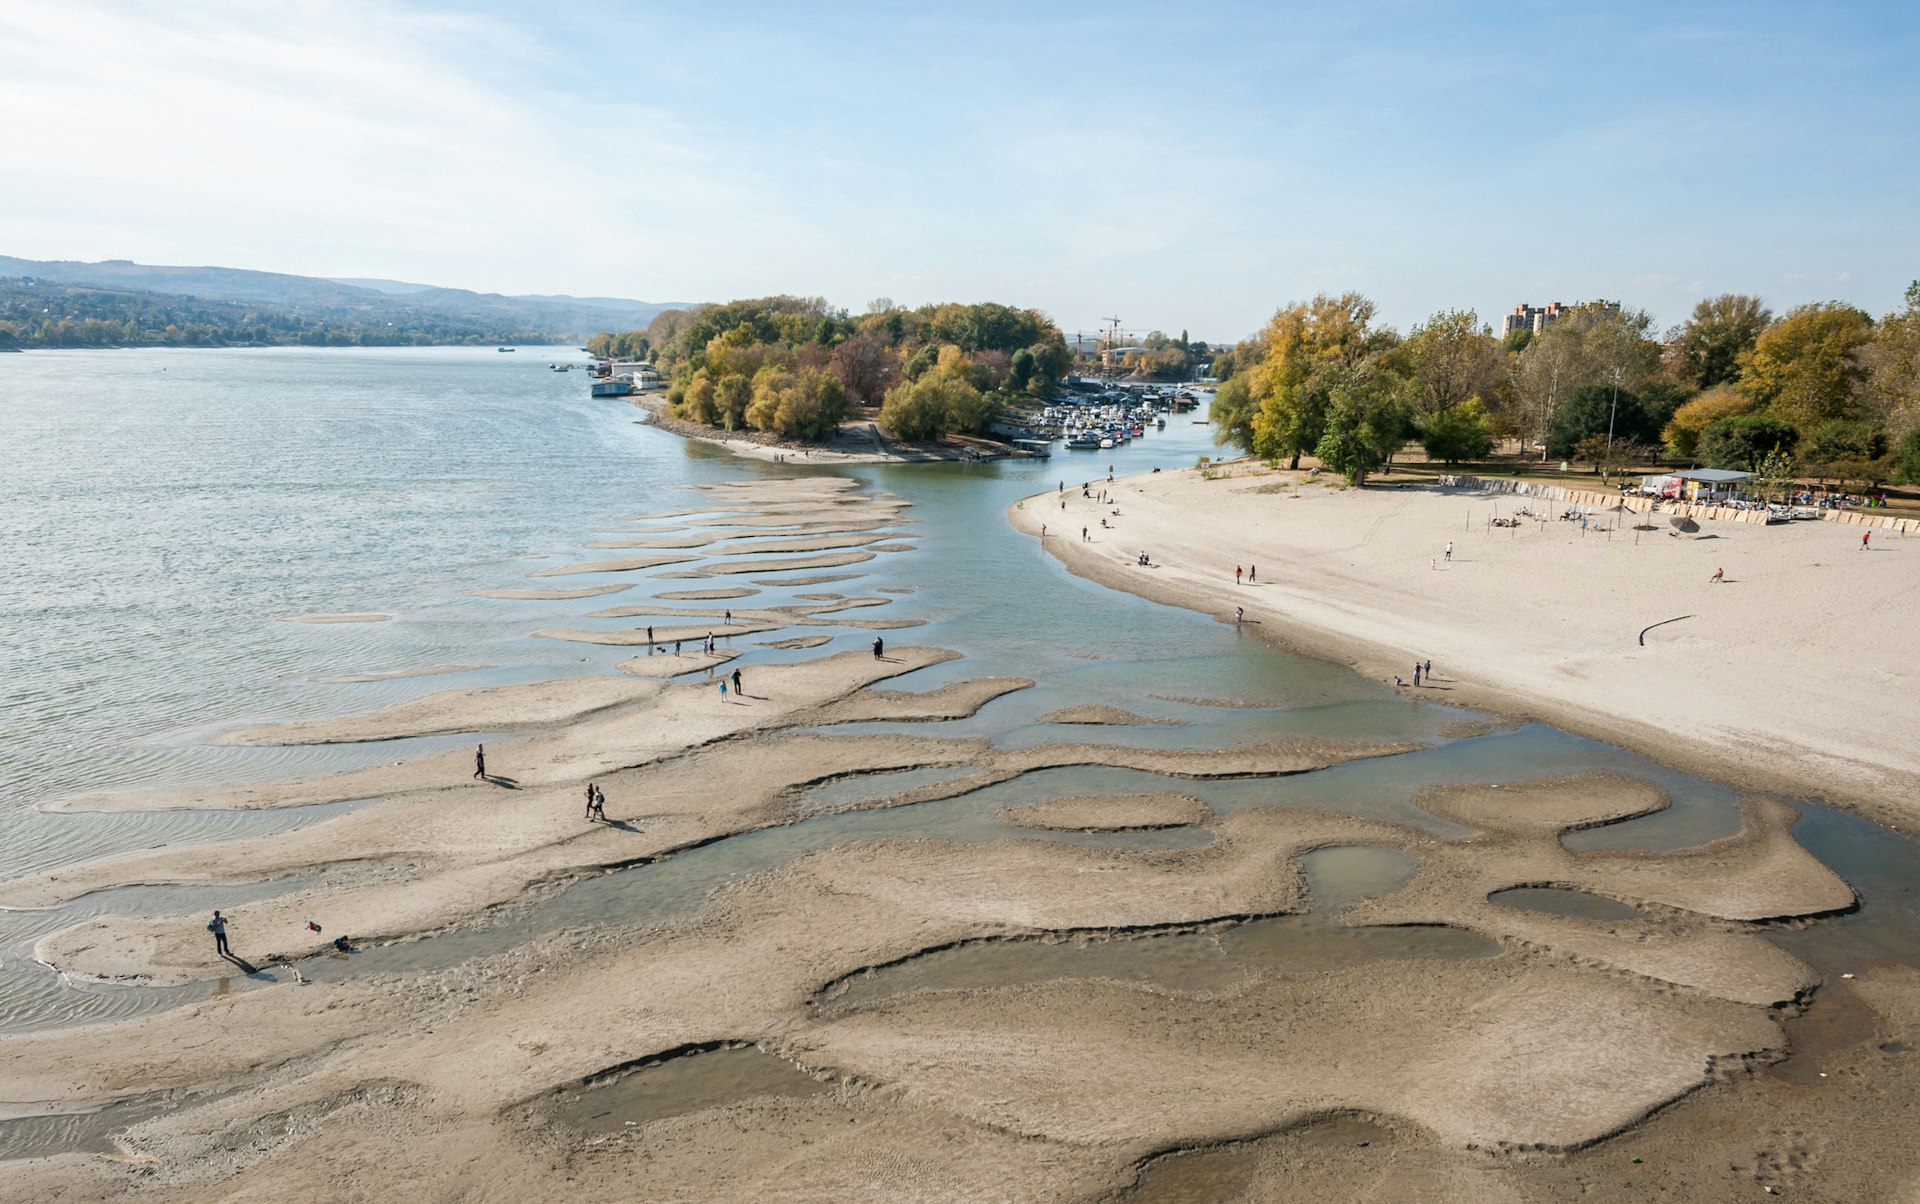 Low tide of the Danube river with people silhouettes walking on the sand islands left after water withdrawal in the Novi Sad